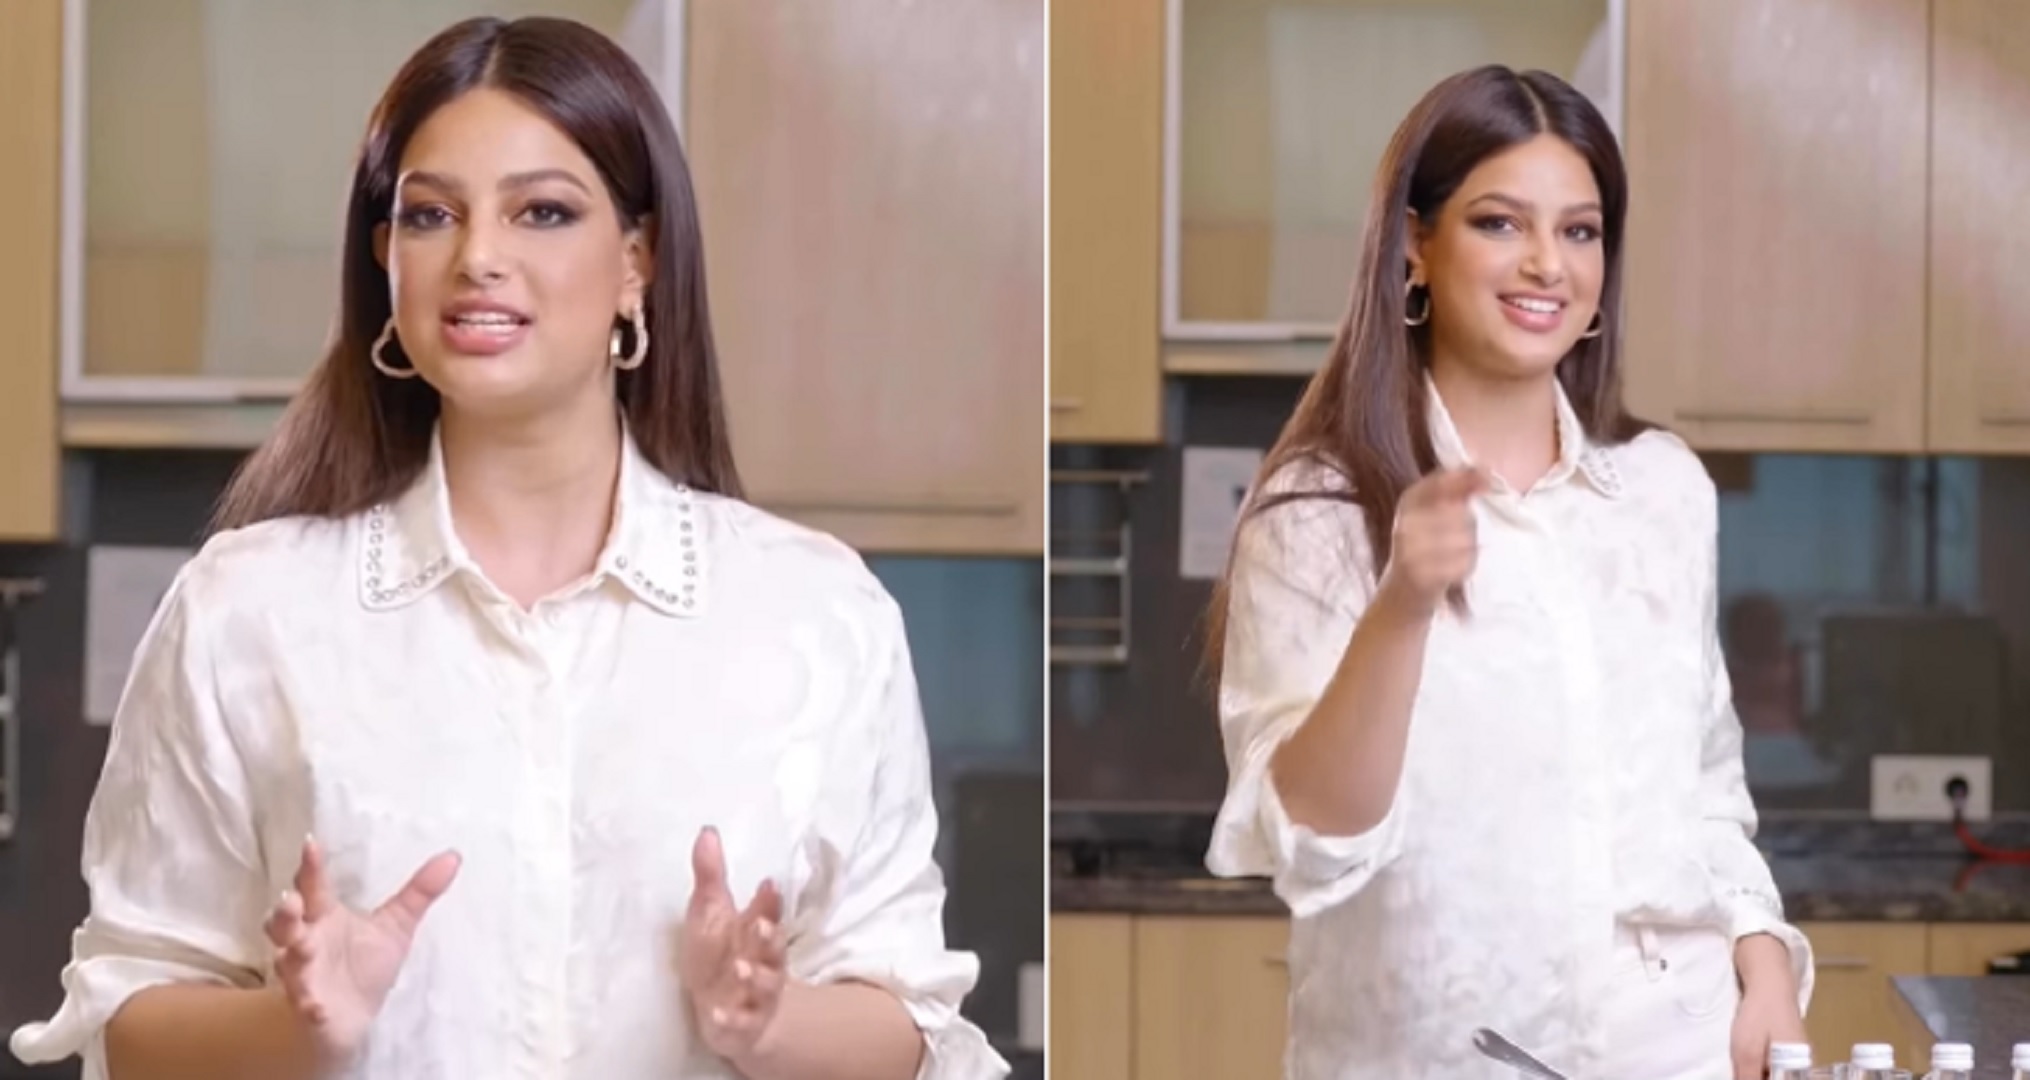 Watch: Miss Universe Harnaaz Sandhu Shares Cooking Video On How To Make Jalebi, Gets Trolled